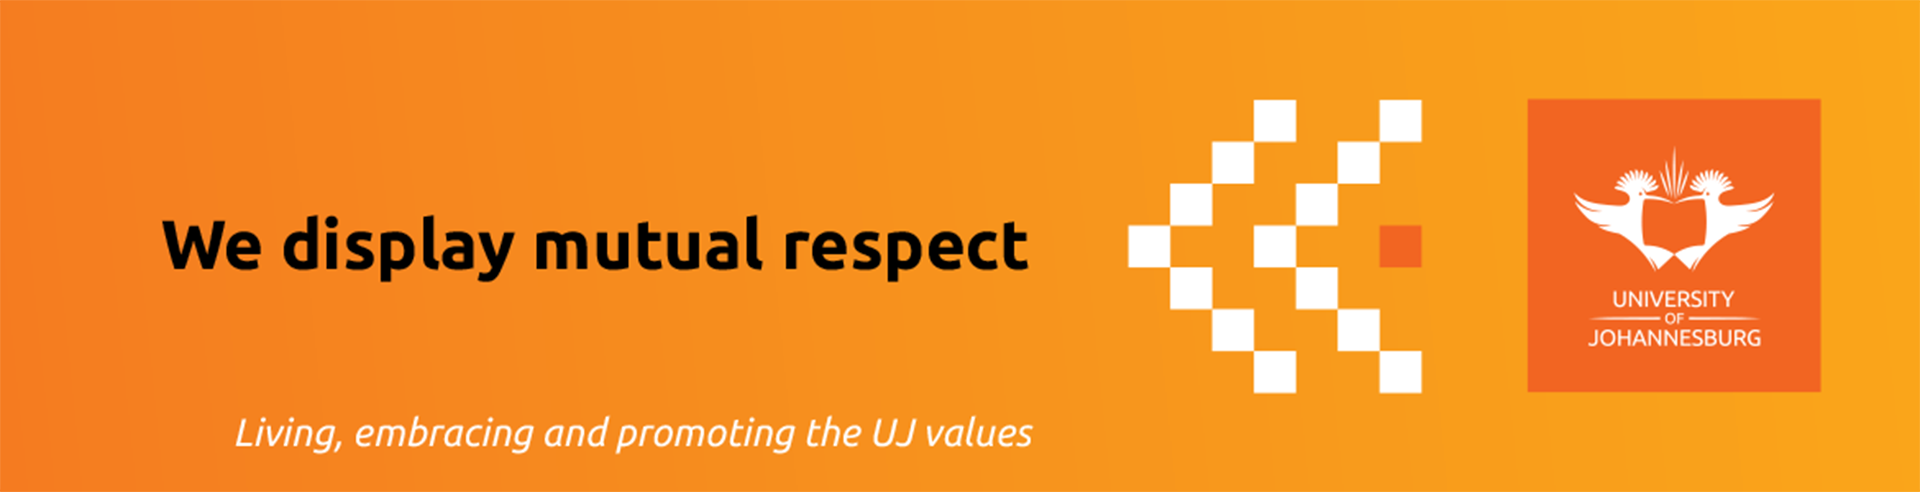 Uj Values Expressions Posters 2020 Ulink 1170x300mm 20